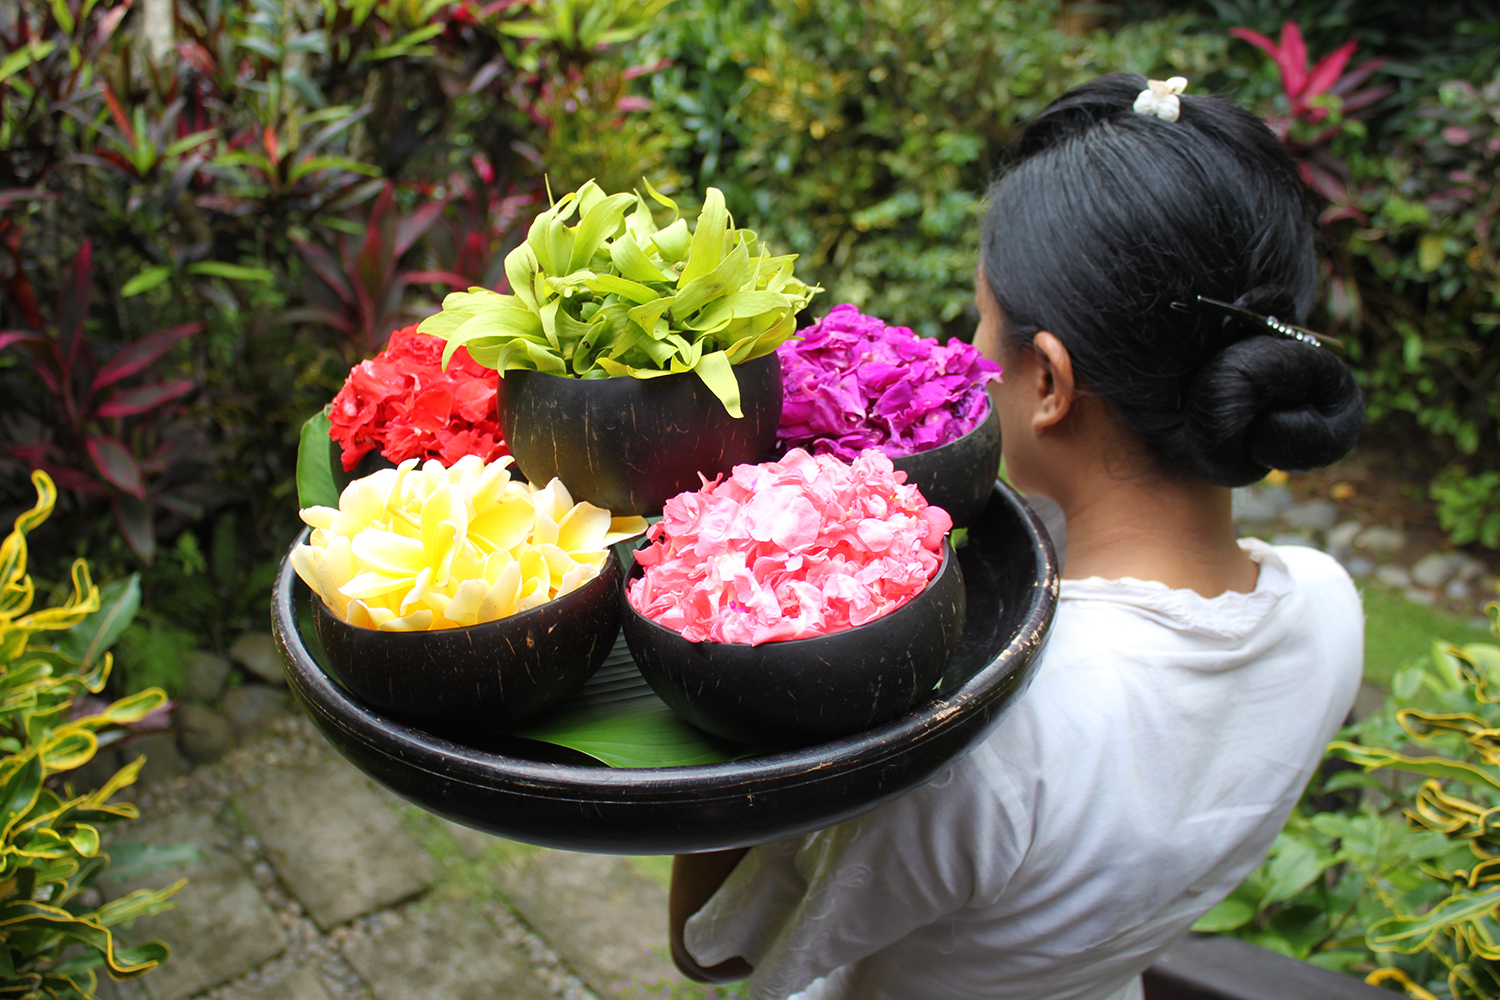 Floral arrangement at a spa in Bali, a sure sign of pampering ahead. Image by Samantha Chalker / Lonely Planet